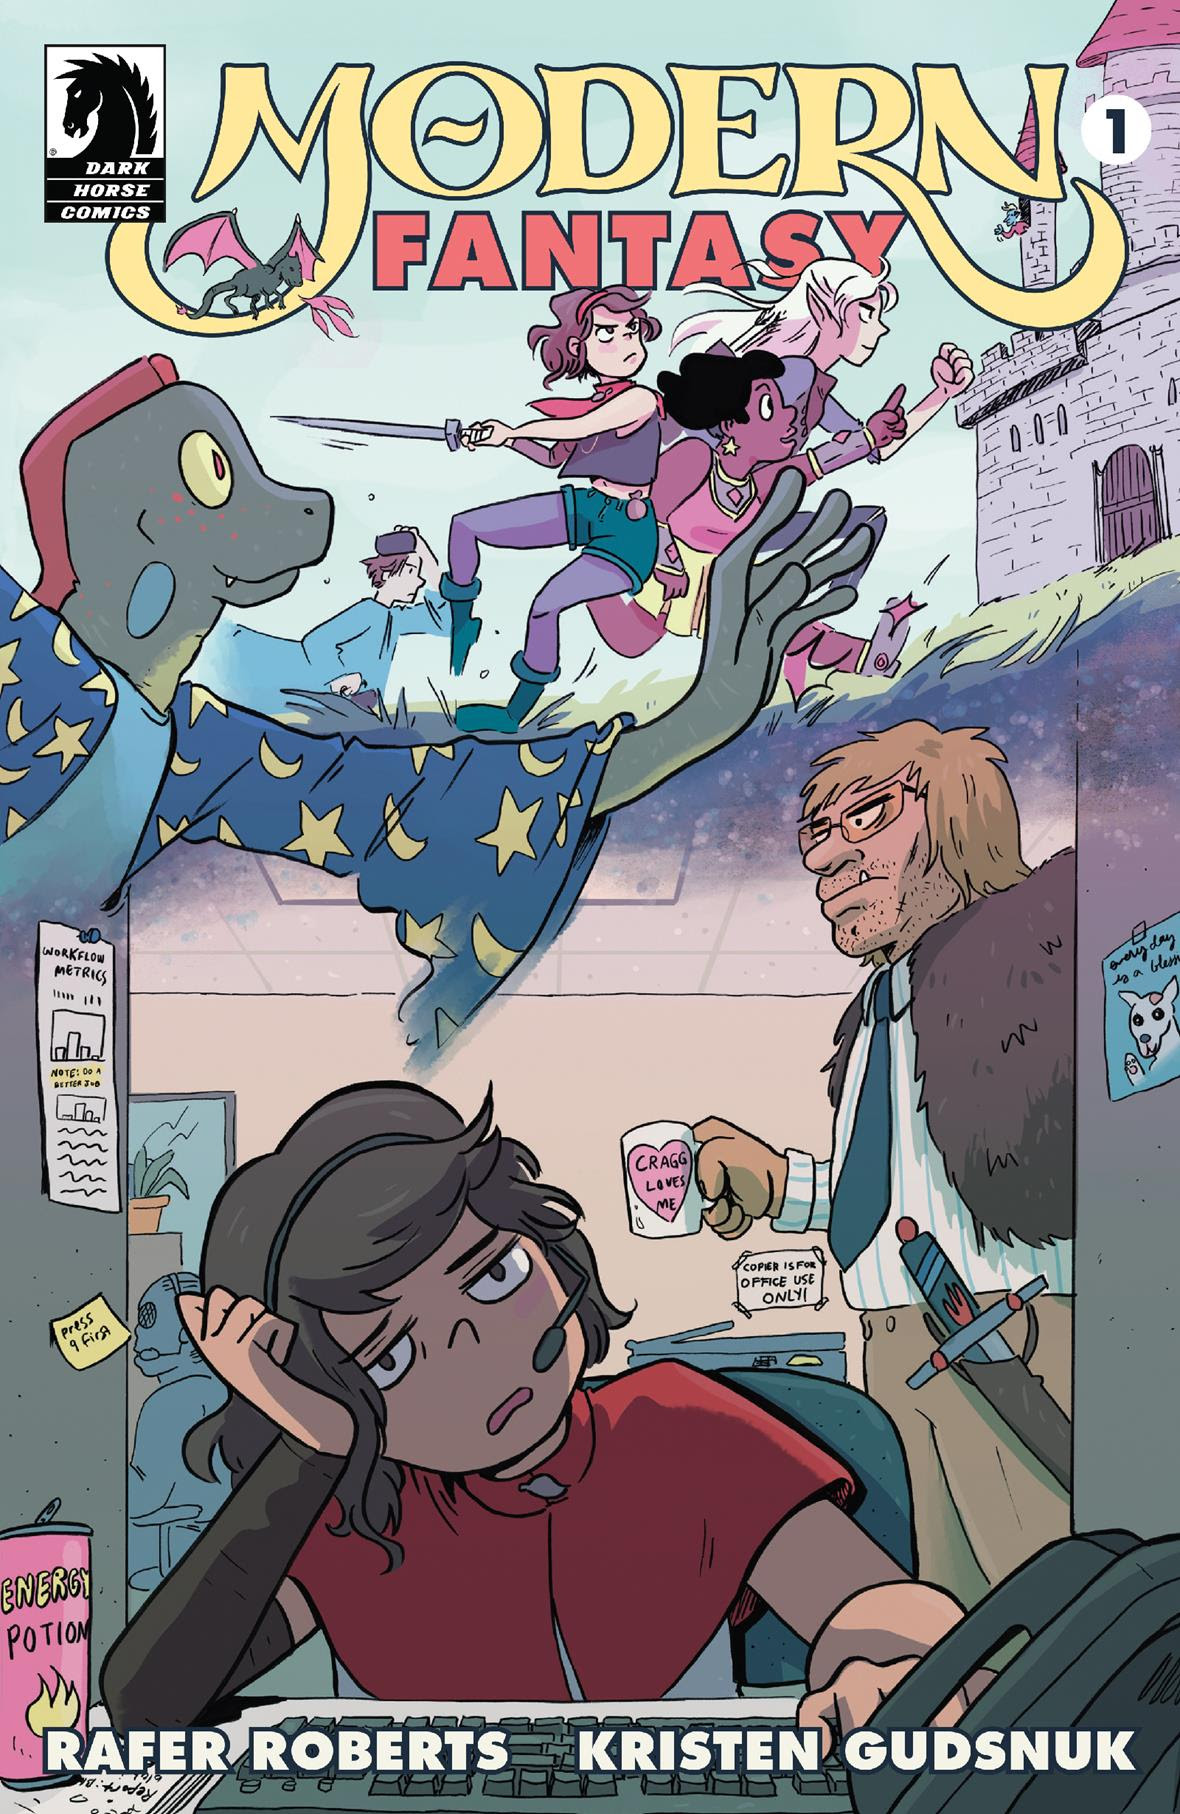 Modern Fantasy #1 review: Adult Swim meets Dungeons & Dragons and has an affair with Office Space